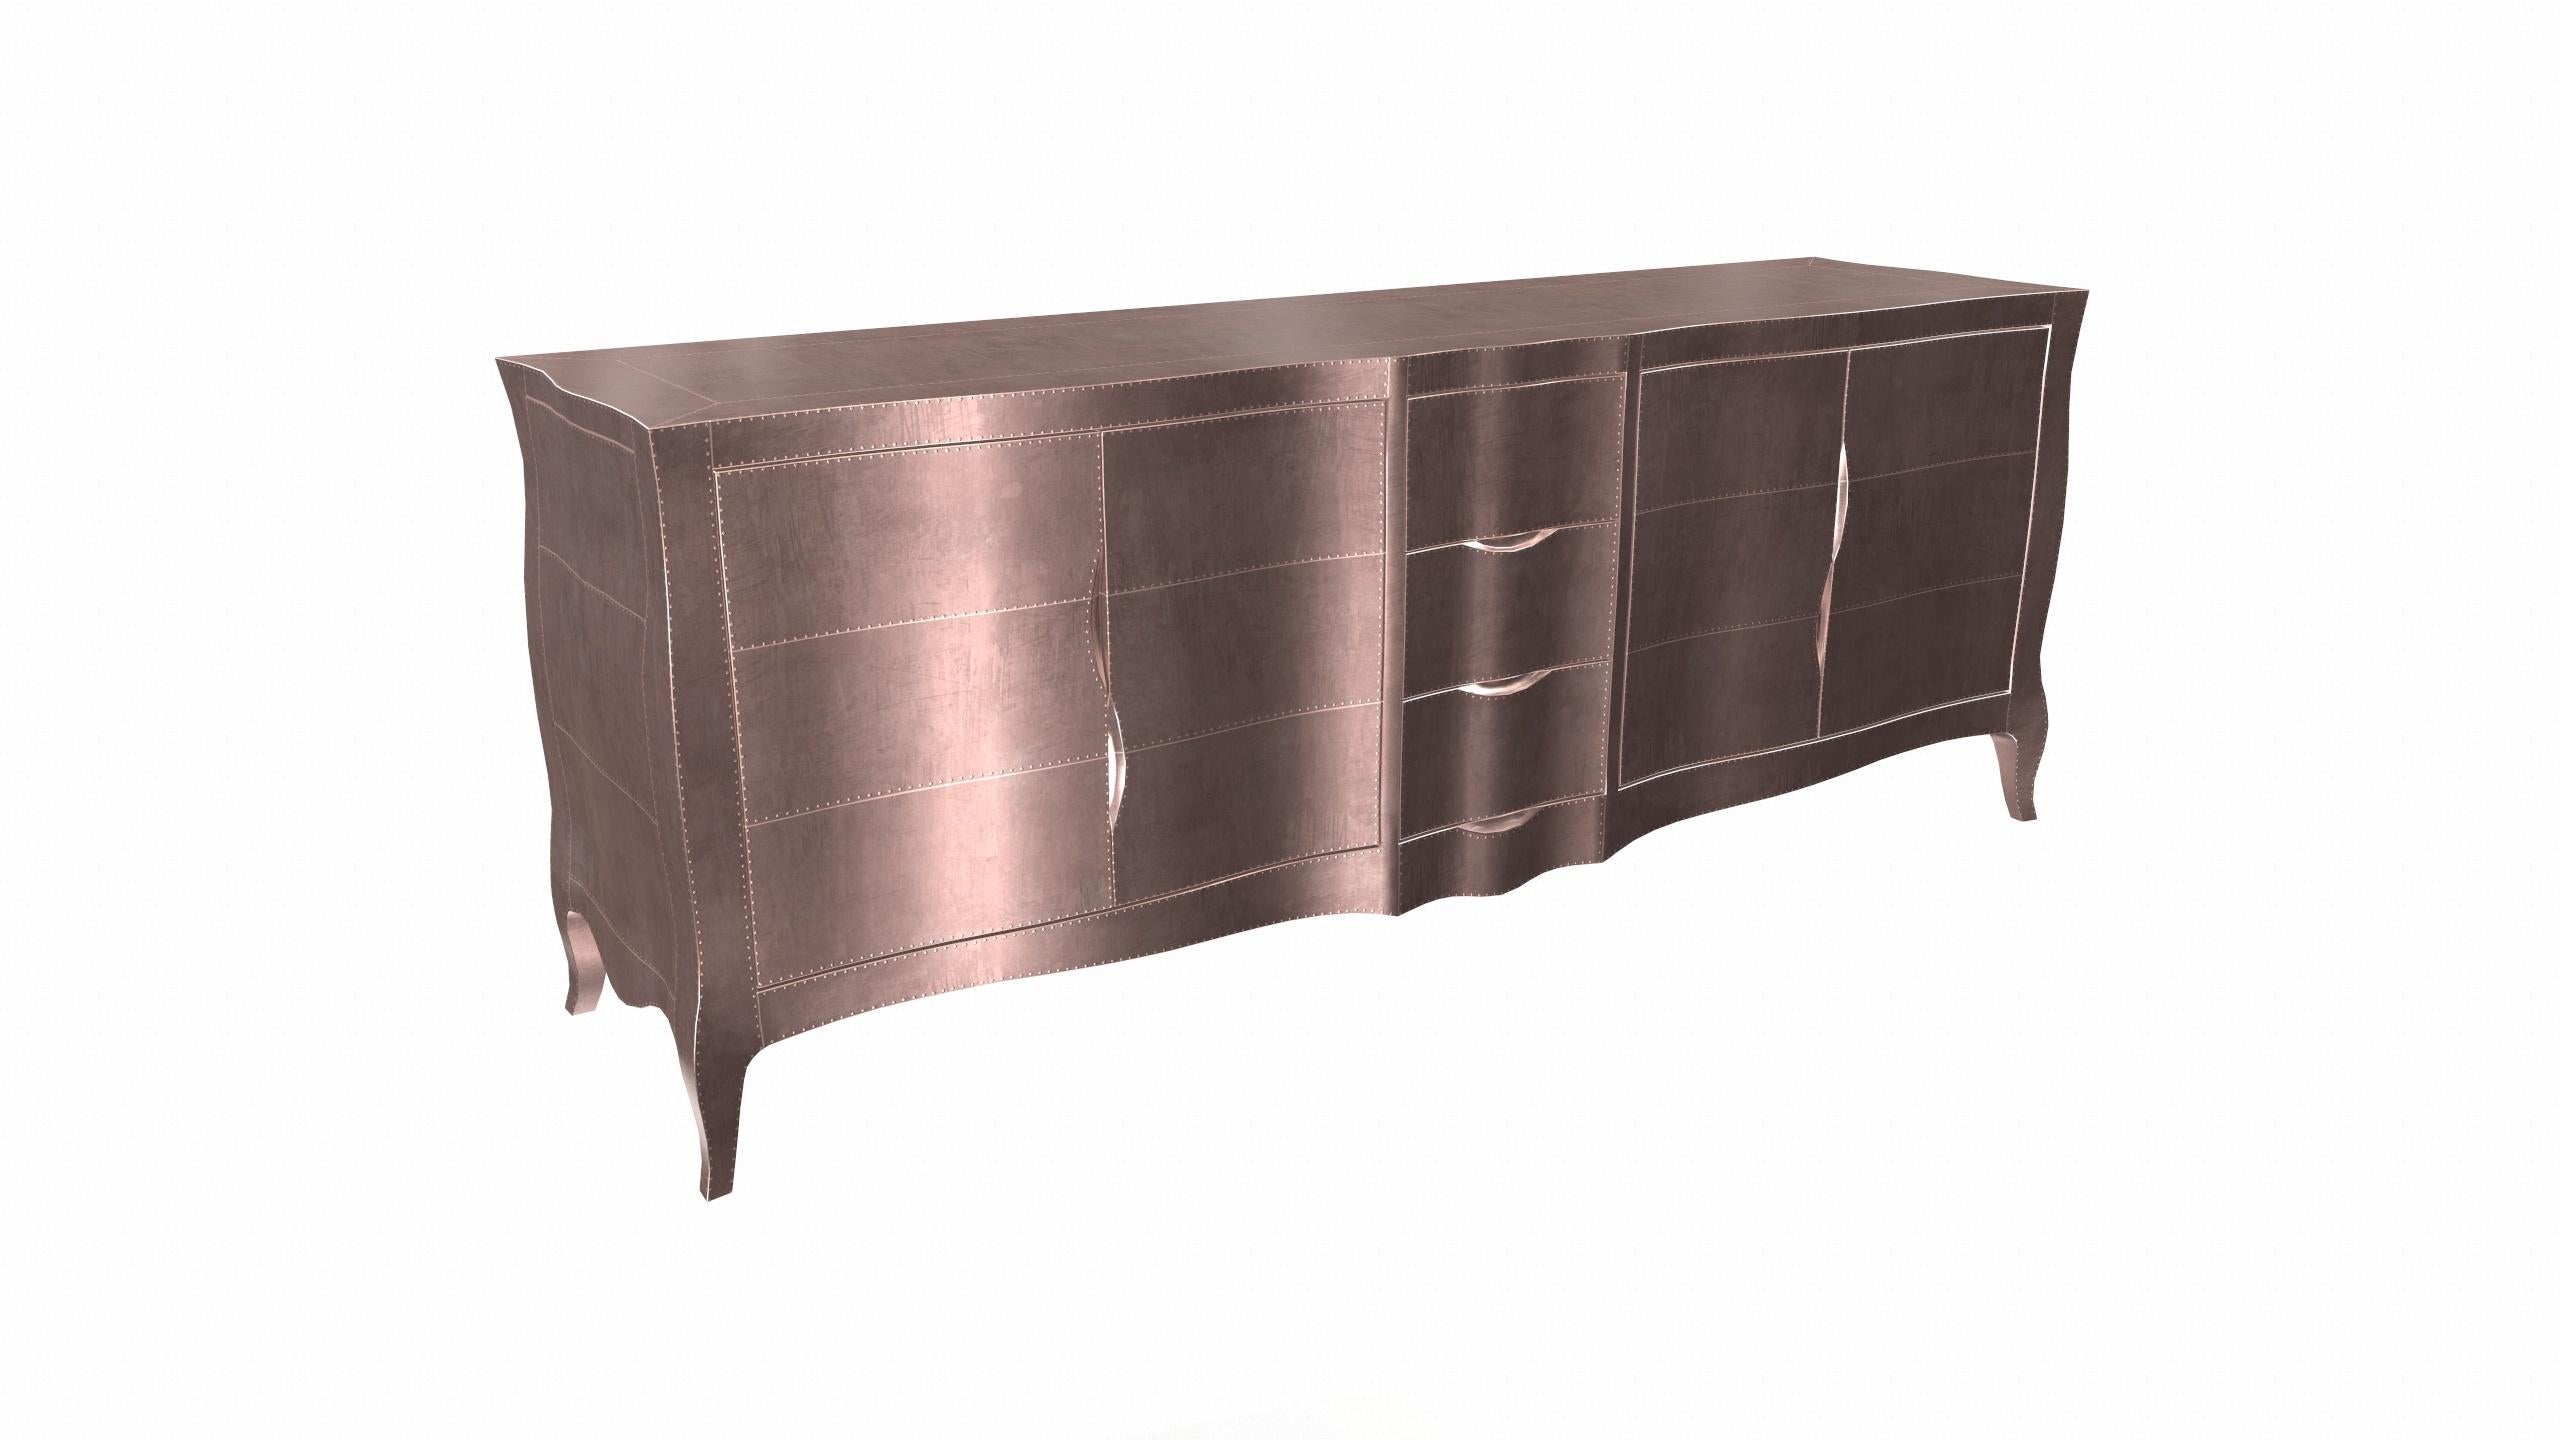 Contemporary Louise Credenza Art Deco Bookcases in Smooth Copper by Paul Mathieu  For Sale